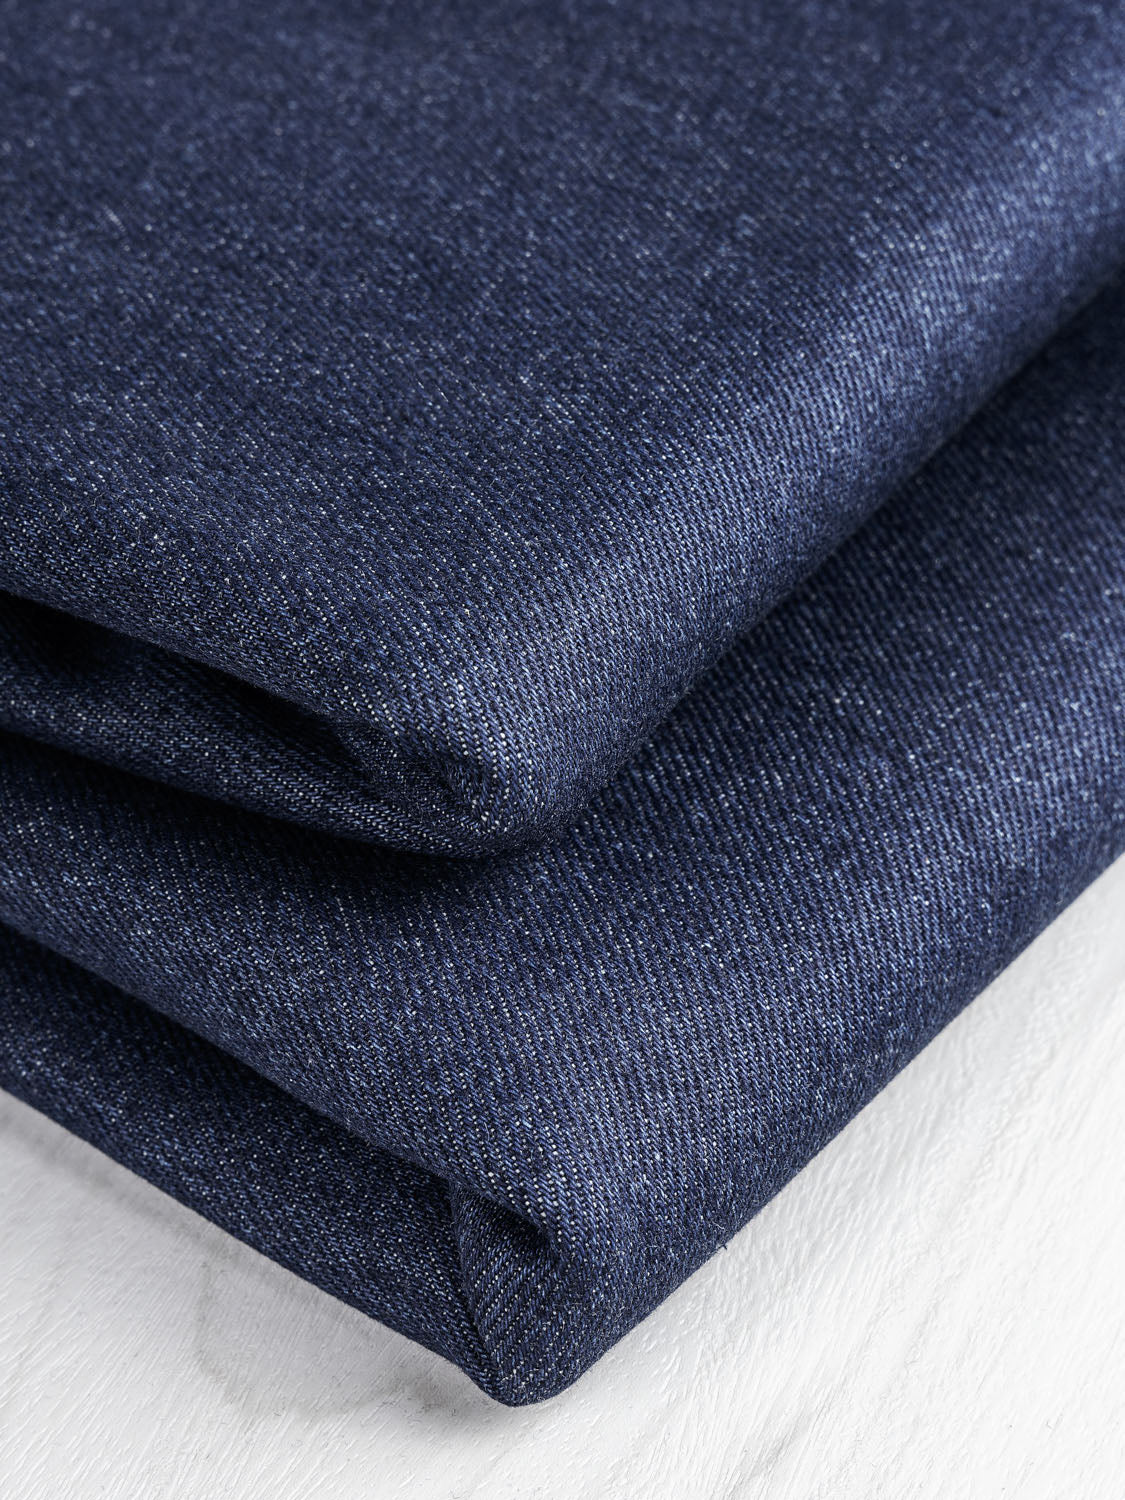 Bottom-Weight Fabrics for Garments and More